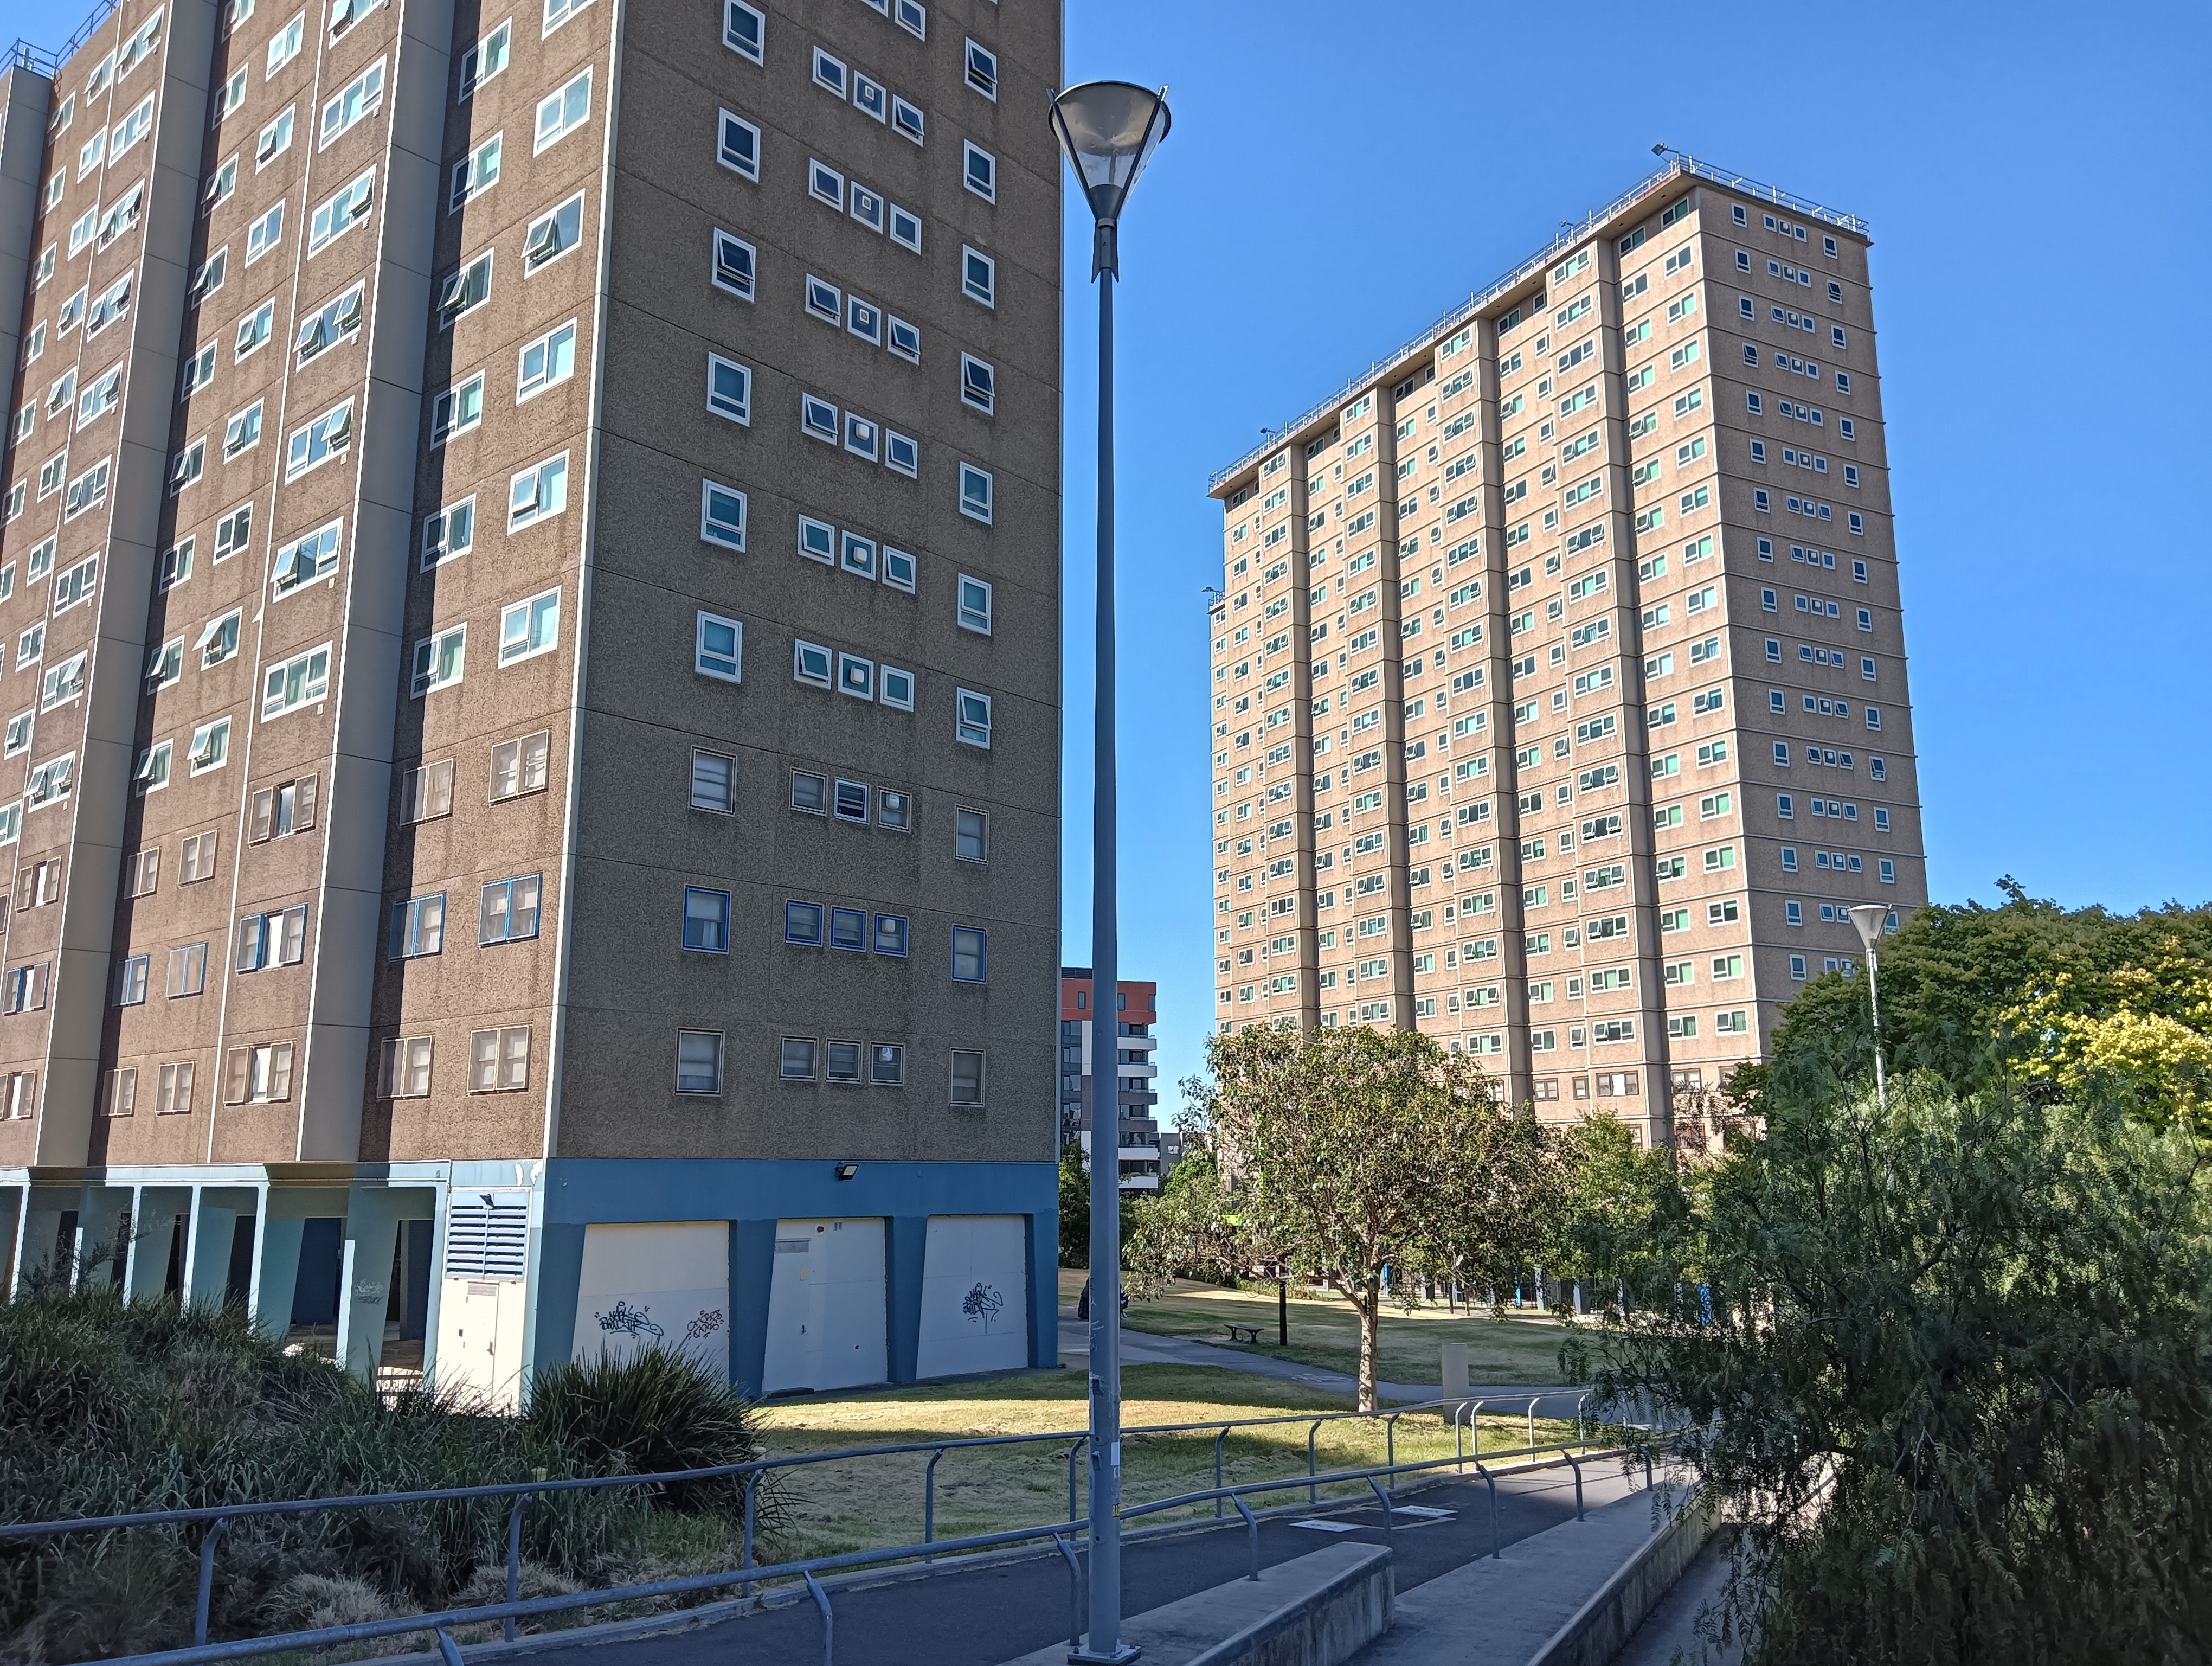 Public housing towers - one in partial view in the foreground, and one in full view in the background. It is a sunny day with a clear blue sky.